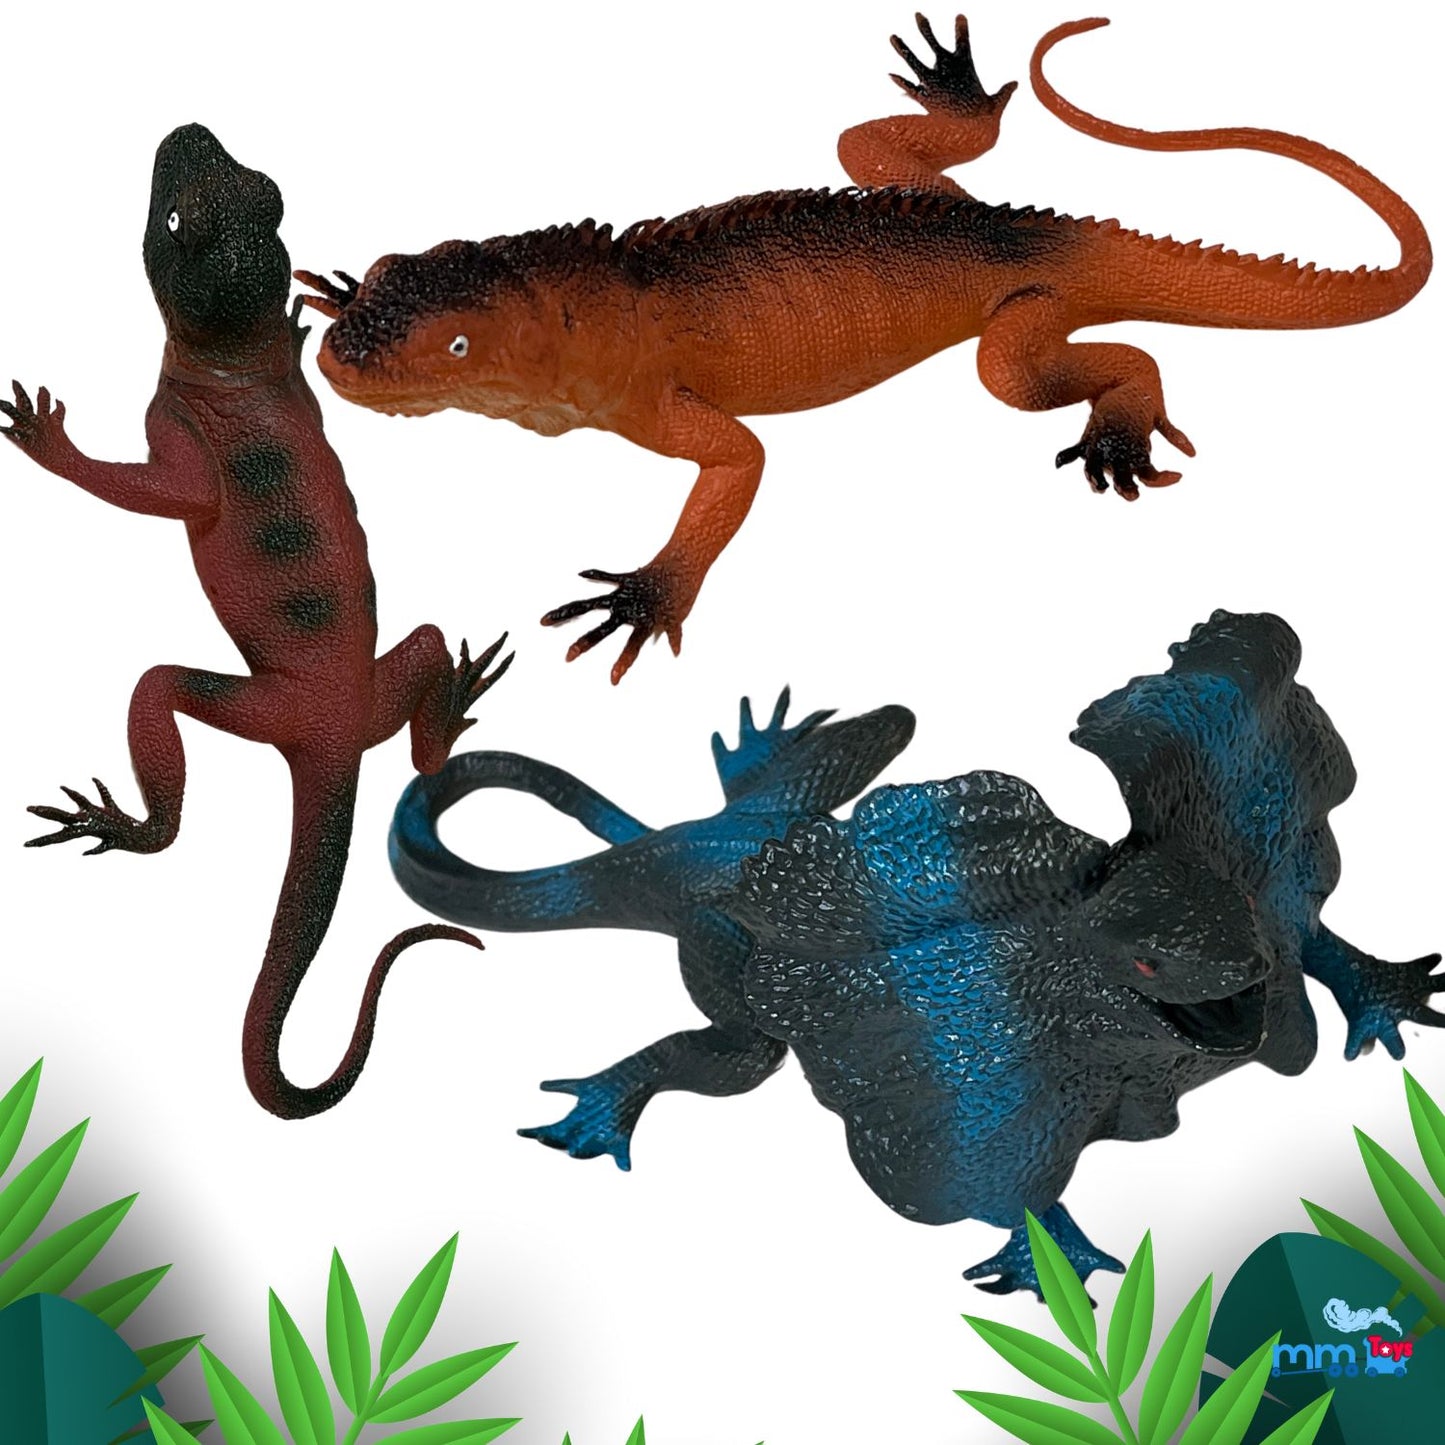 MM TOYS Reptiles Lizard Animal Figures Die Cast Toys Set Assorted Pack Of 6 Pcs (7 Inch Each )Educational Gift Set For 5 Year And Above Kids - Multicolor